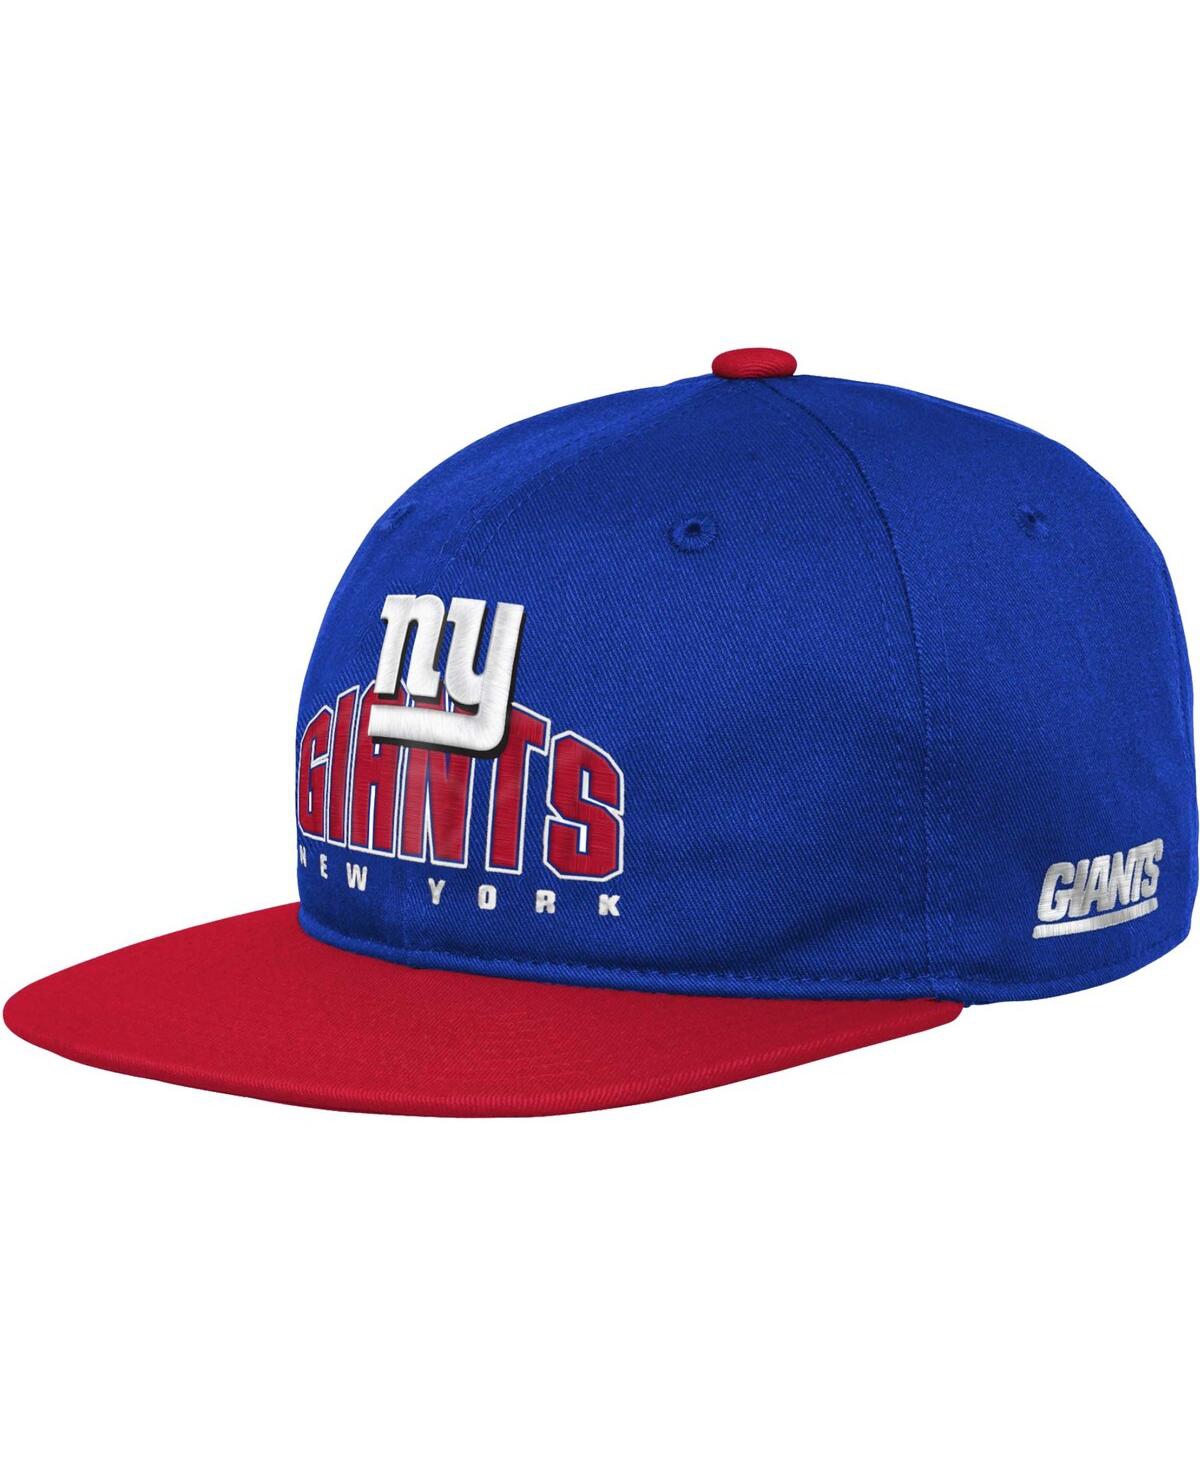 Outerstuff Kids' Big Boys And Girls Royal New York Giants Legacy Deadstock Snapback Hat